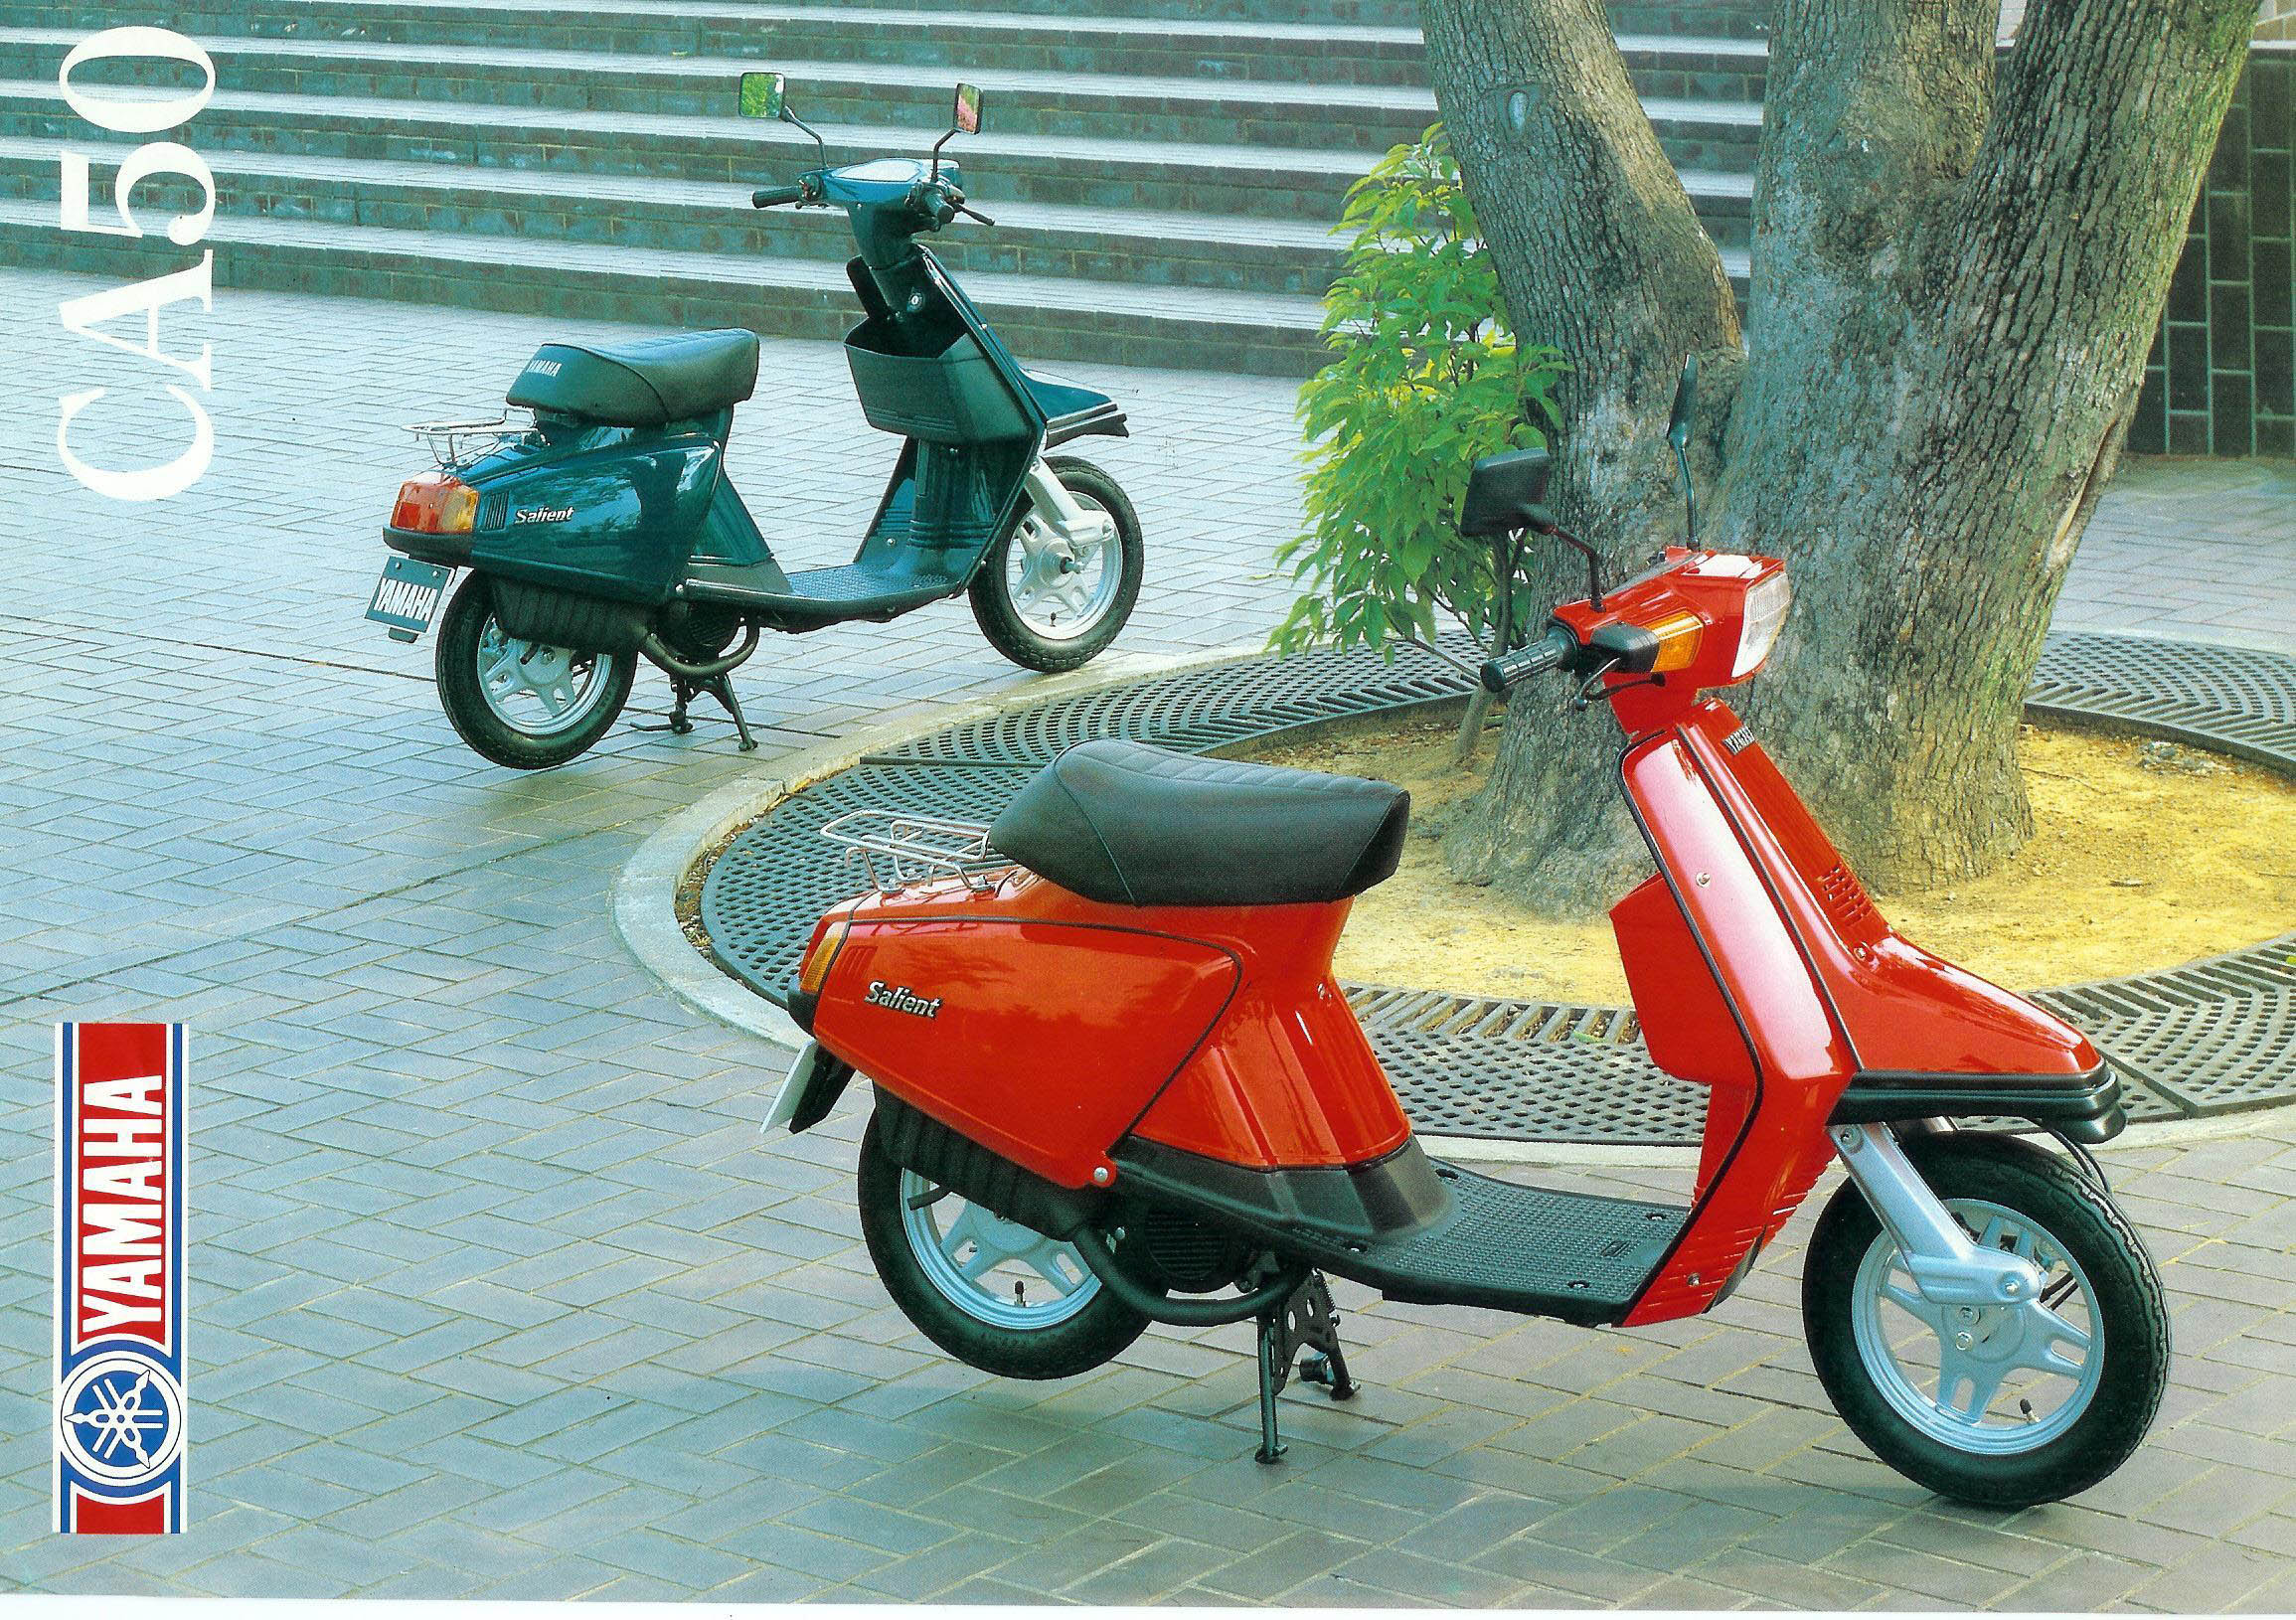 General Yamaha Scooter Information